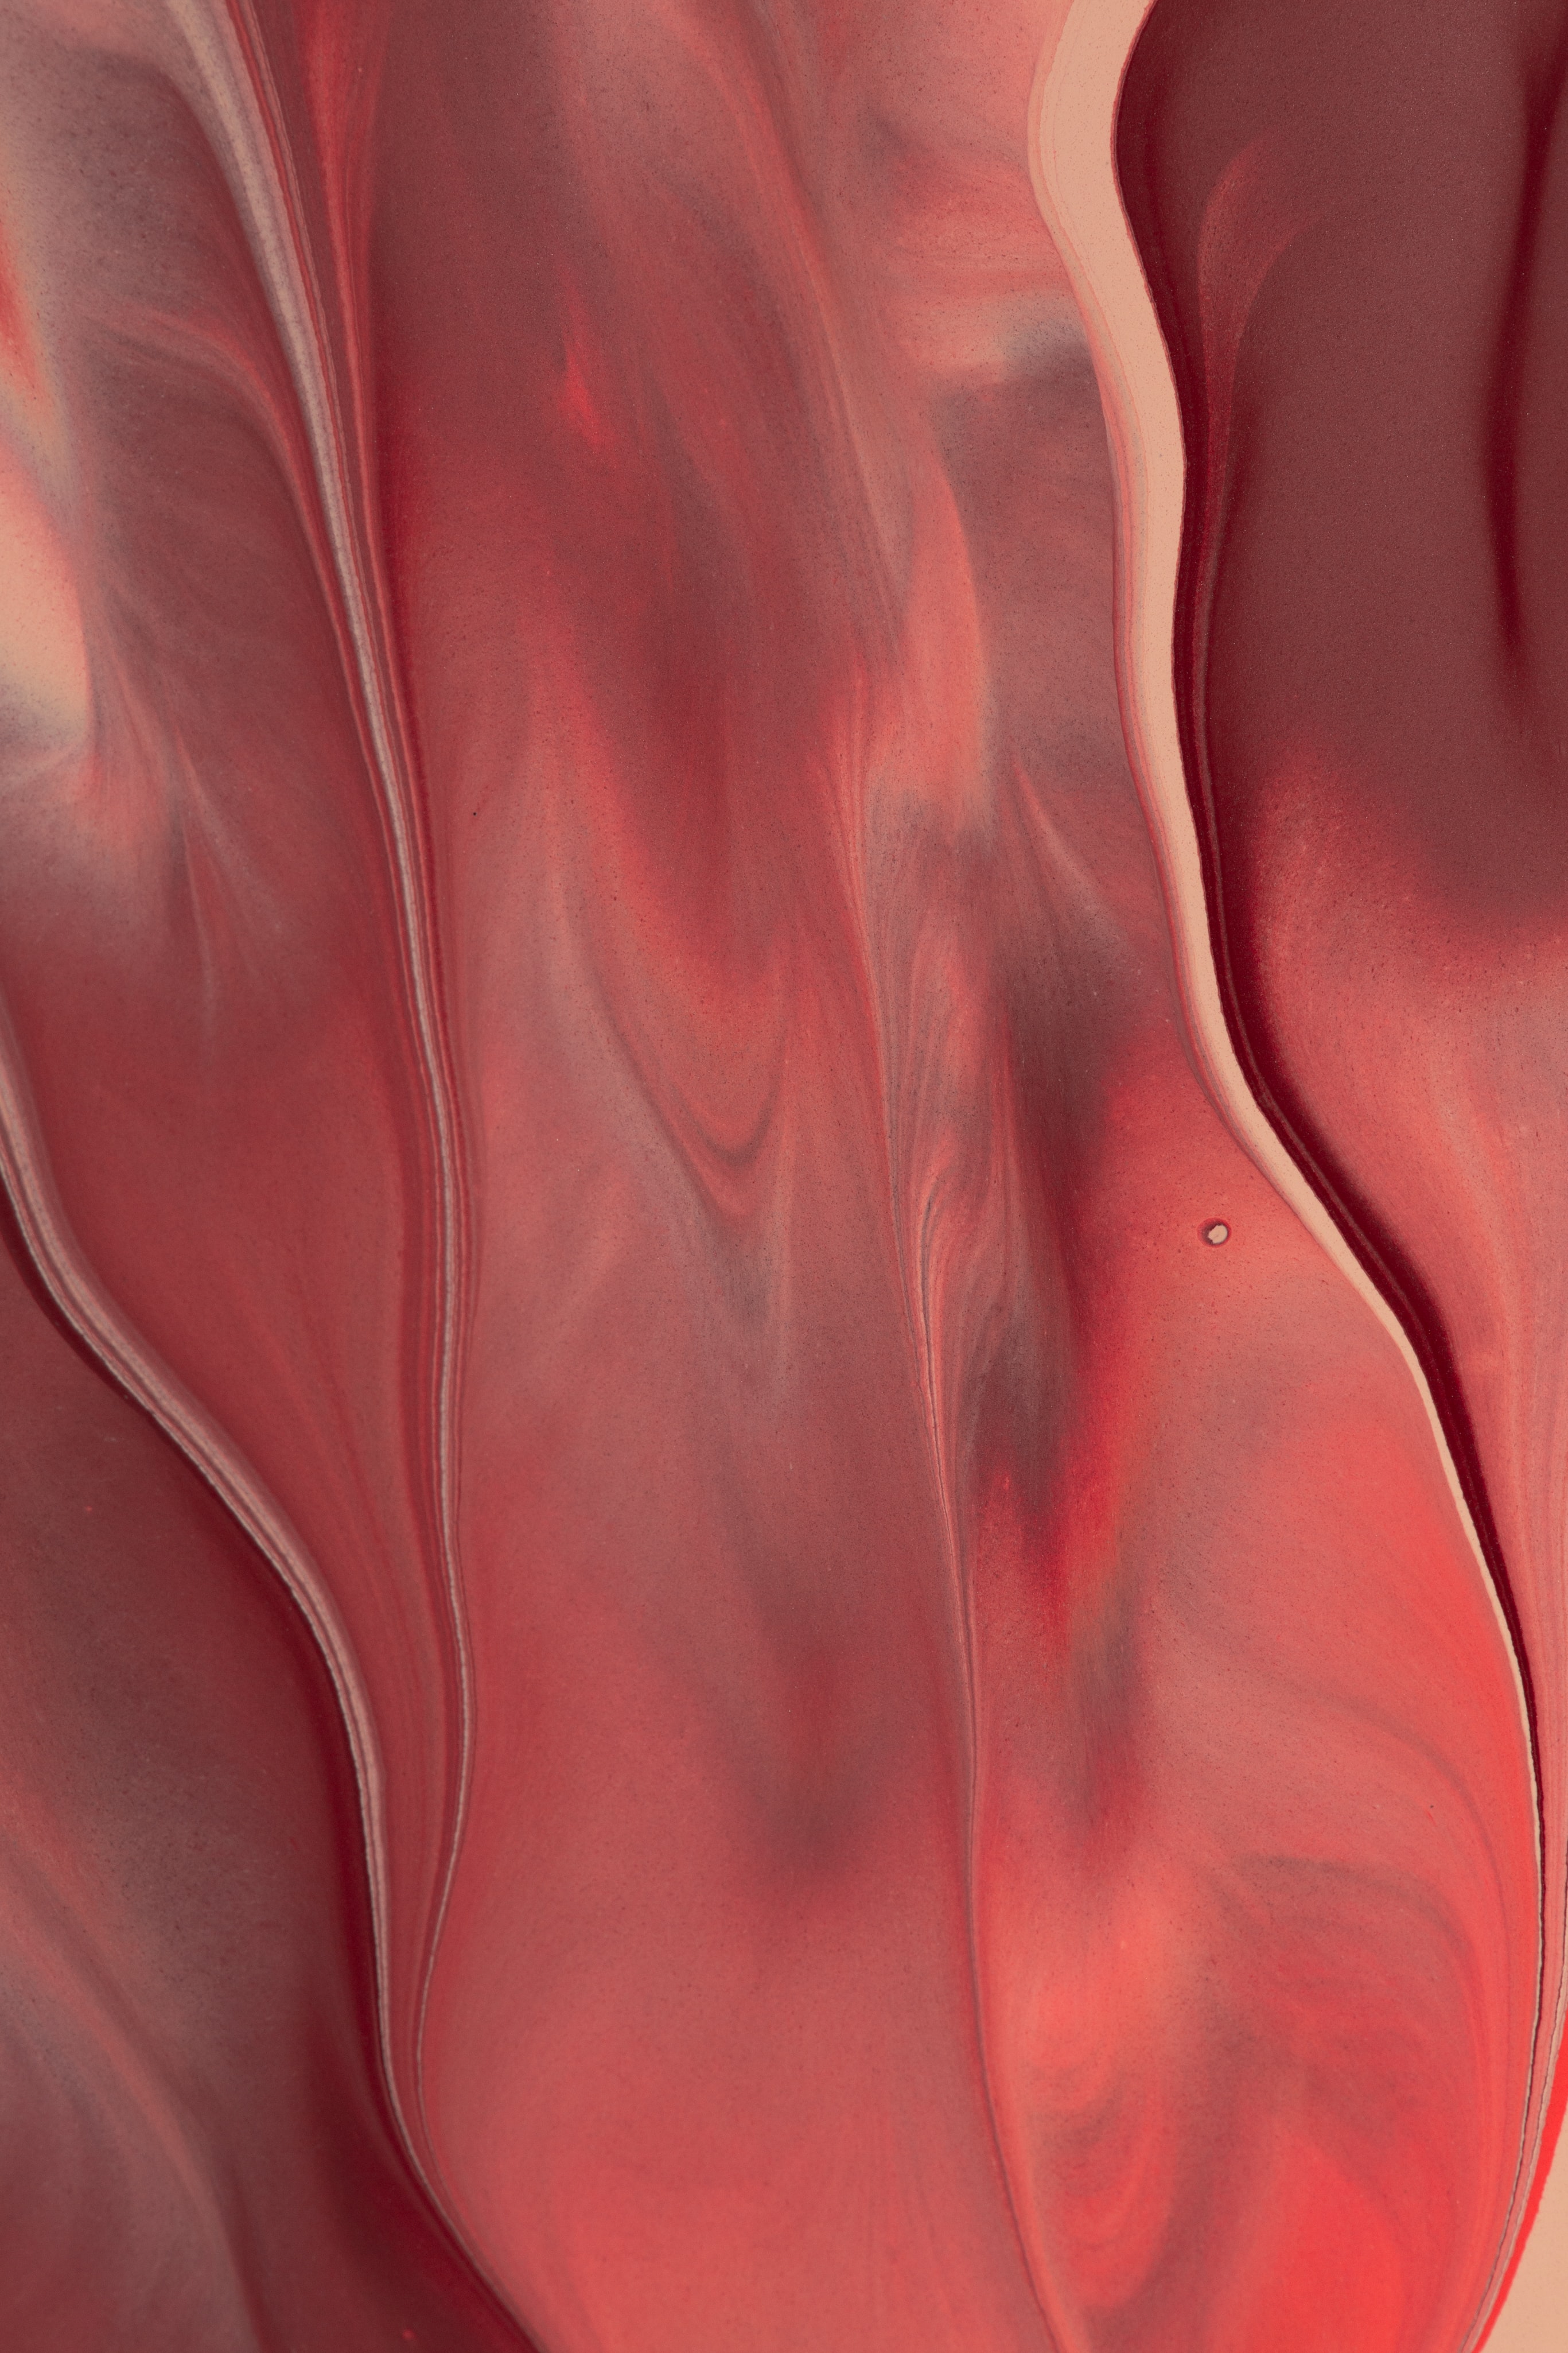 liquid, paint, red, abstract, divorces Aesthetic wallpaper